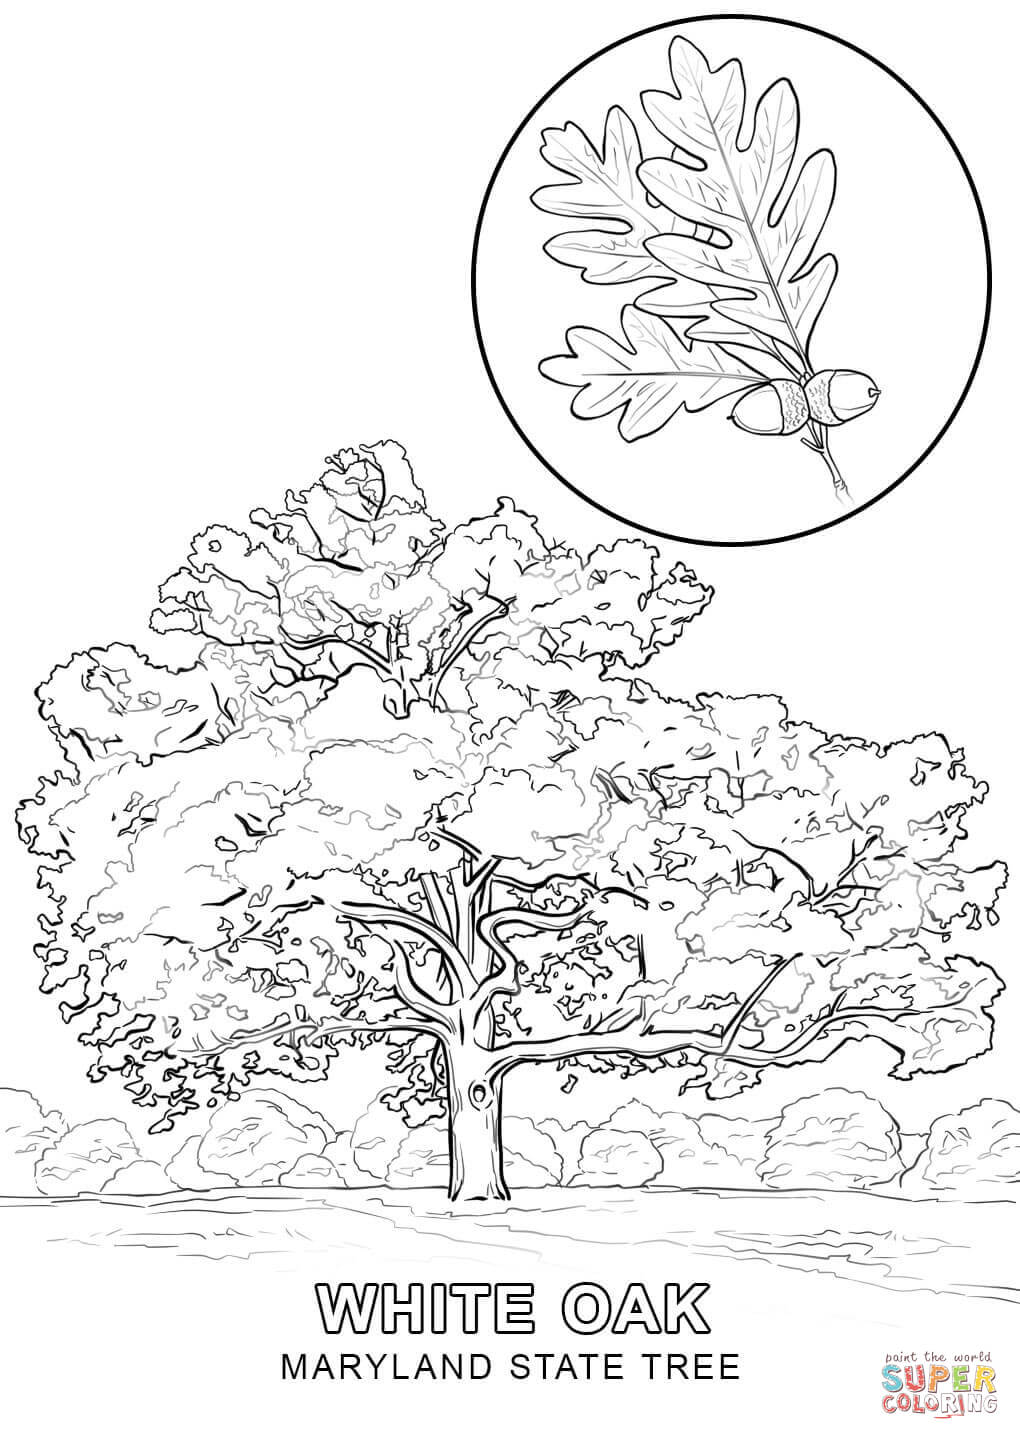 Maryland State Tree coloring page | Free Printable Coloring Pages